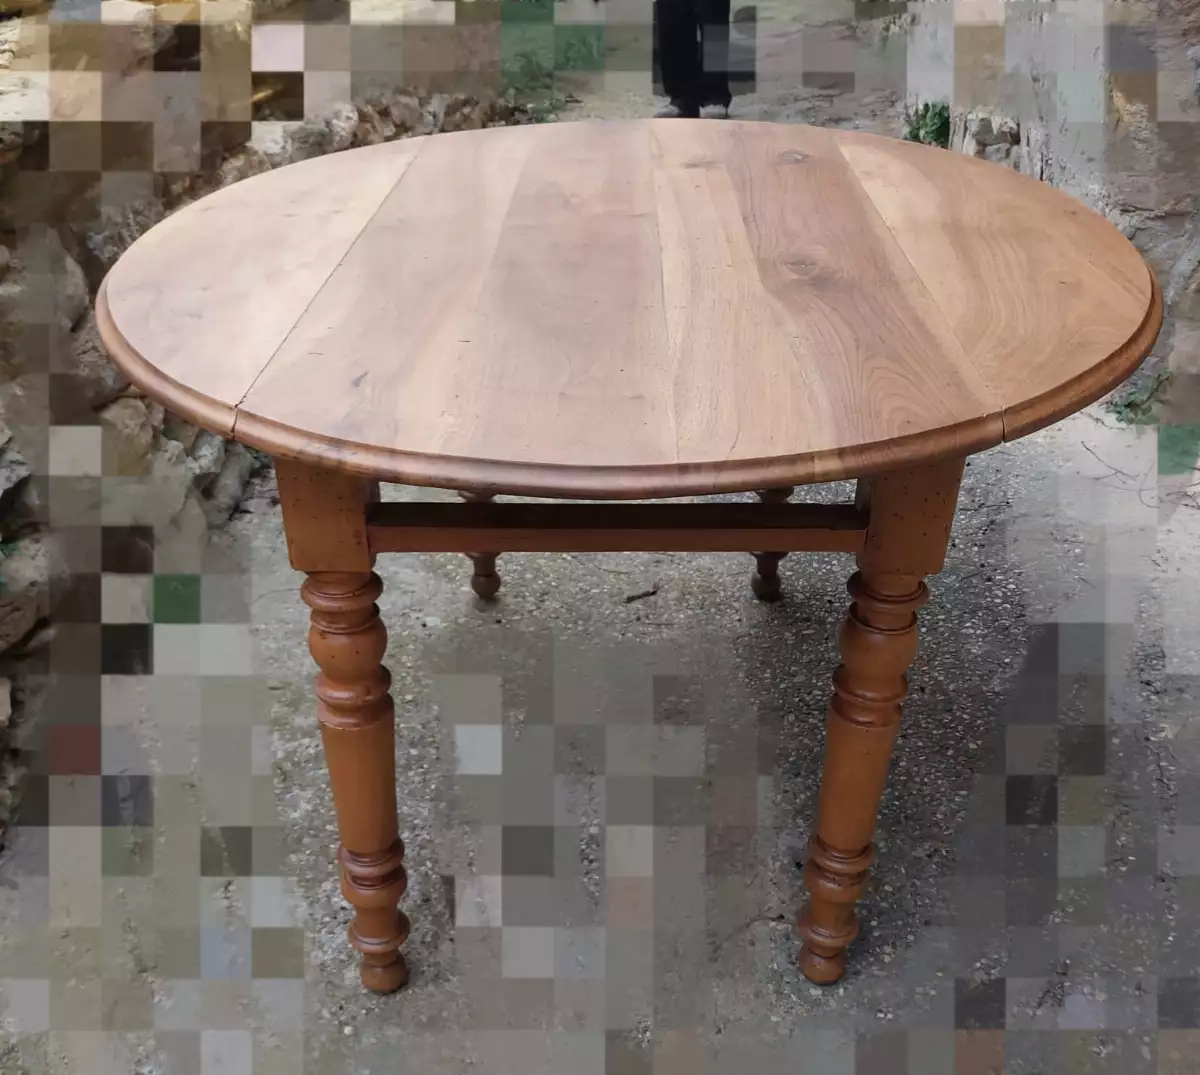 Table ovale ancienne avec volets, noyer massif